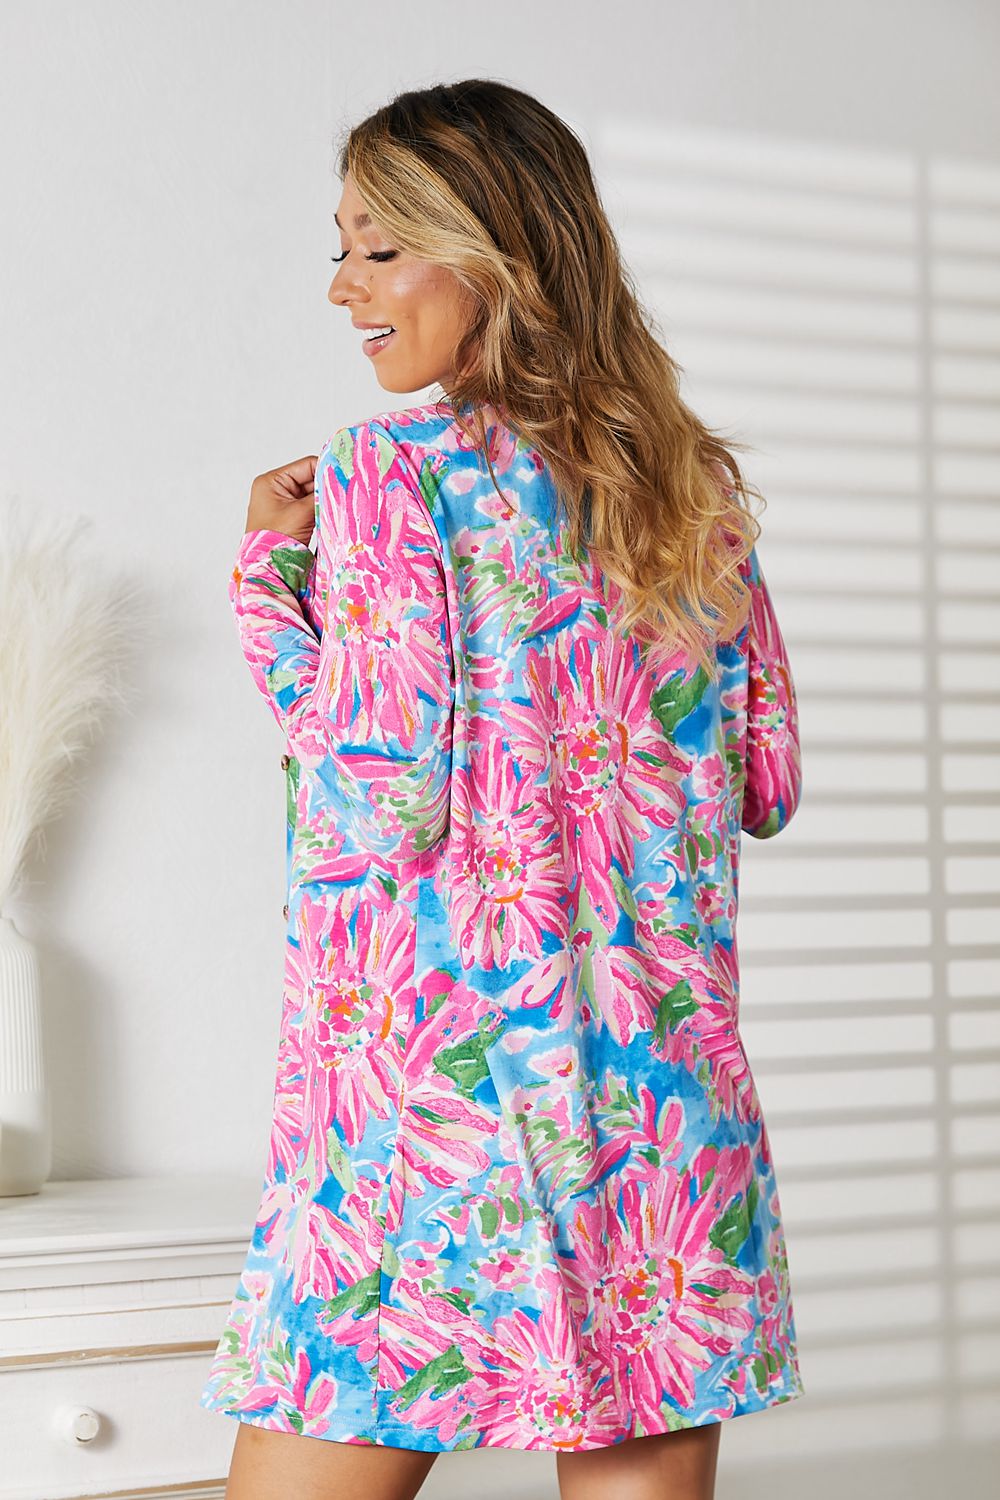 Double Take Floral Open Front Long Sleeve Cardigan | us.meeeshop